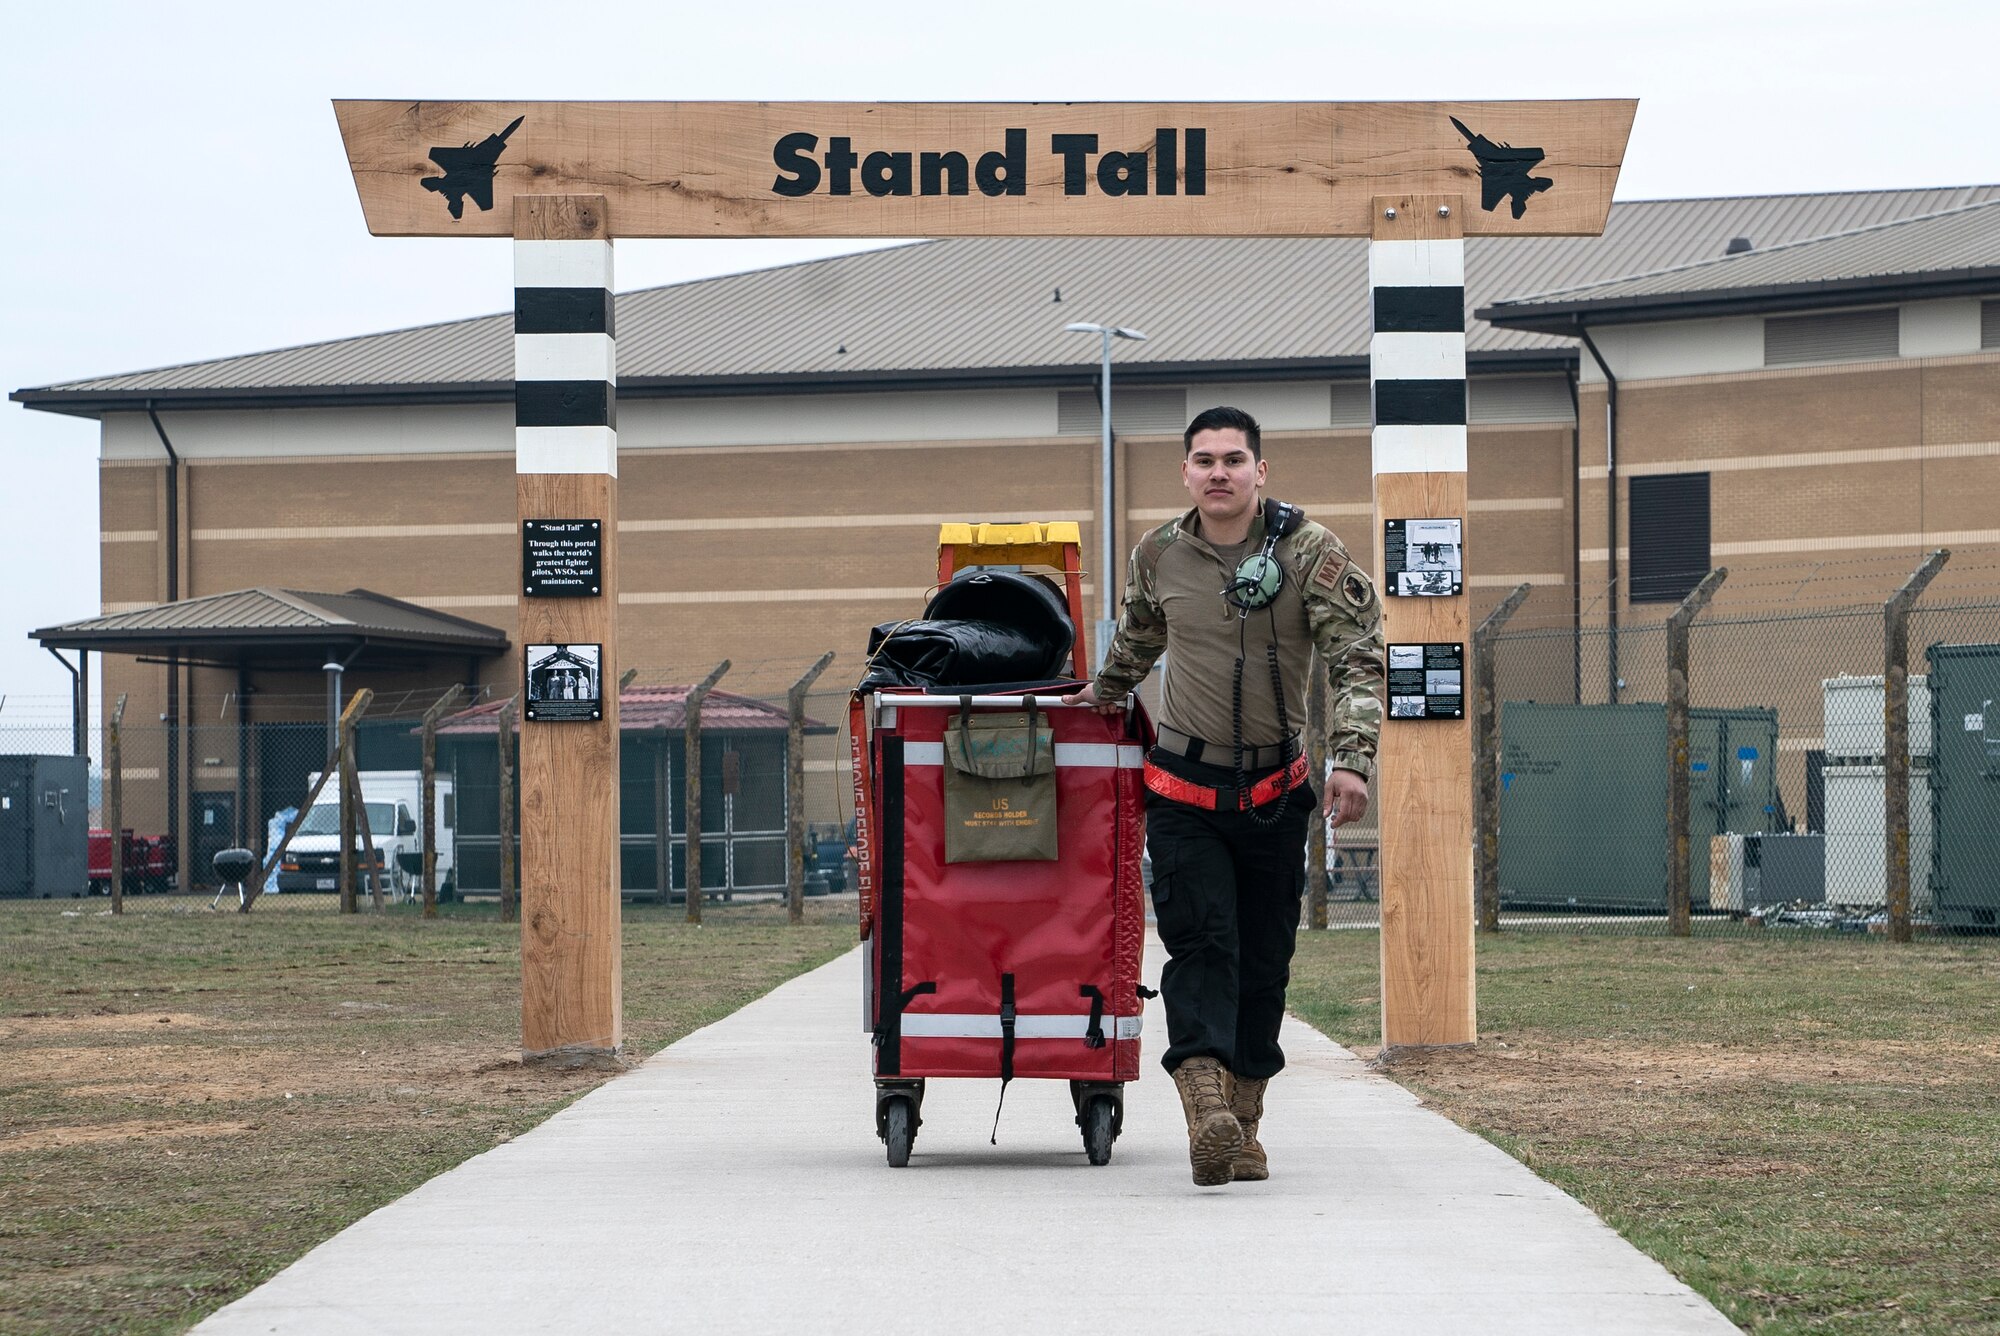 U.S. Air Force Senior Airman Justin Sanchez, 48th Aircraft Maintenance Squadron crew chief, walks under the heritage arch toward the flightline at Royal Air Force Lakenheath, England, March 8, 2021. Liberty Wing aircrew and Airmen will walk under this arch on their way to carry out the 48th Fighter Wing mission for years to come. (U.S. Air Force photo by Airman 1st Class Jessi Monte)